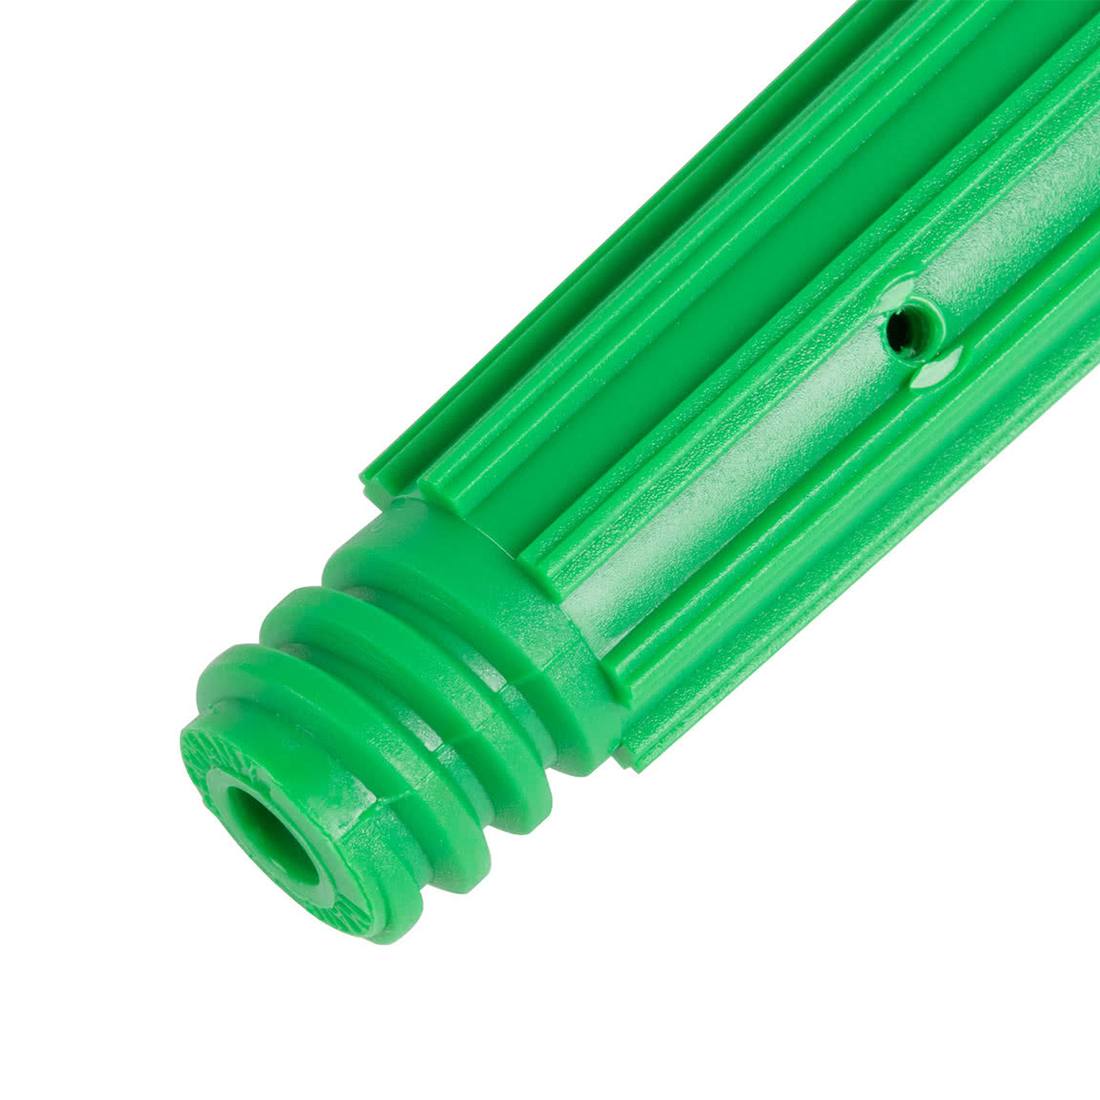 Unger Snap In Pole Tip - Color Green - Top Groove Detailed Close-Up View